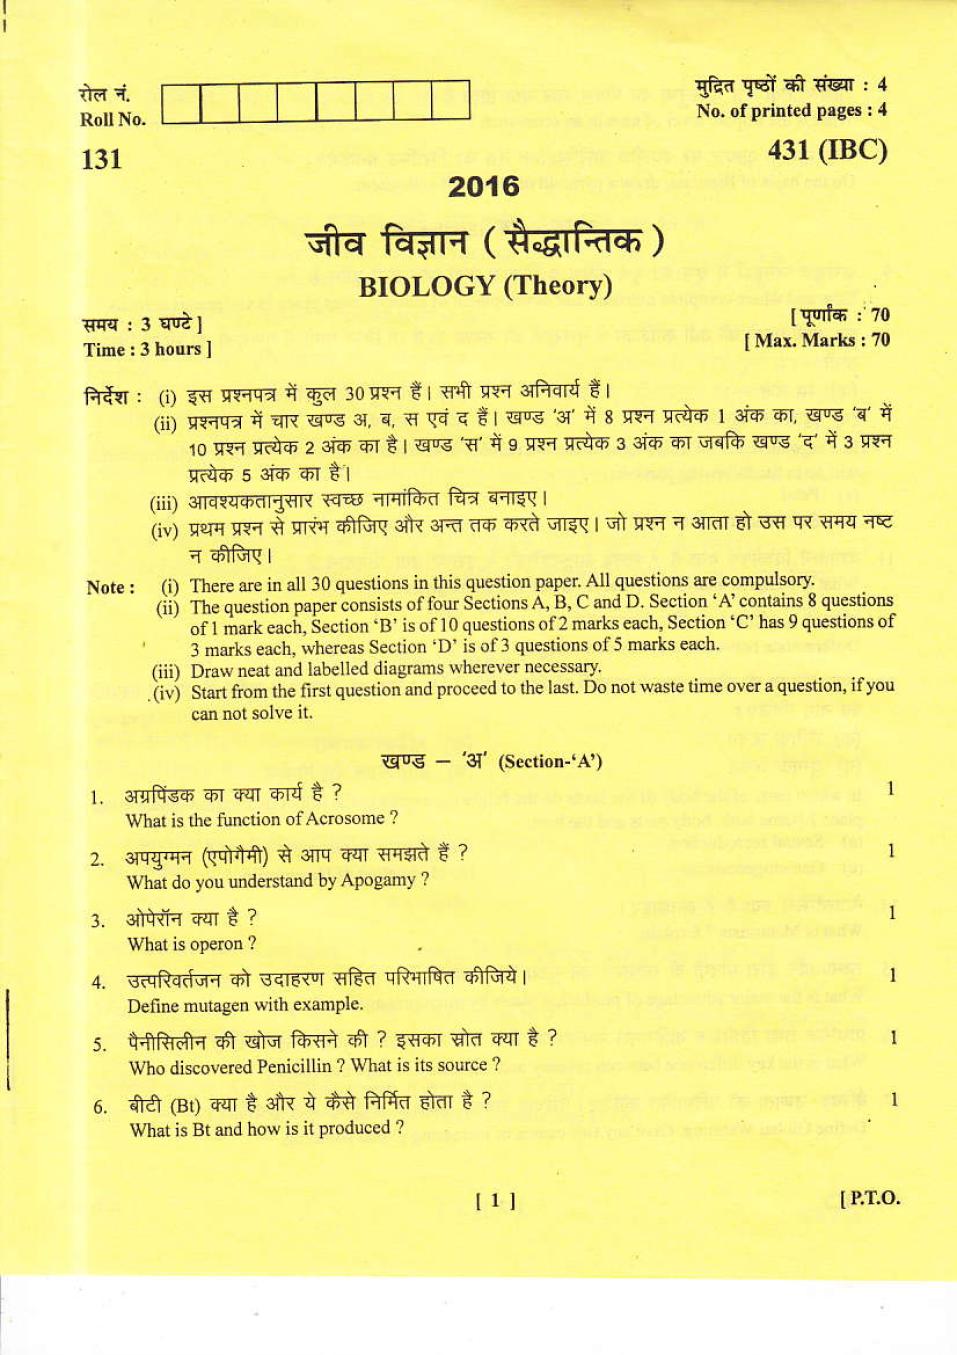 Uttarakhand Board Class 12 Question Paper 2016 for Biology - Page 1